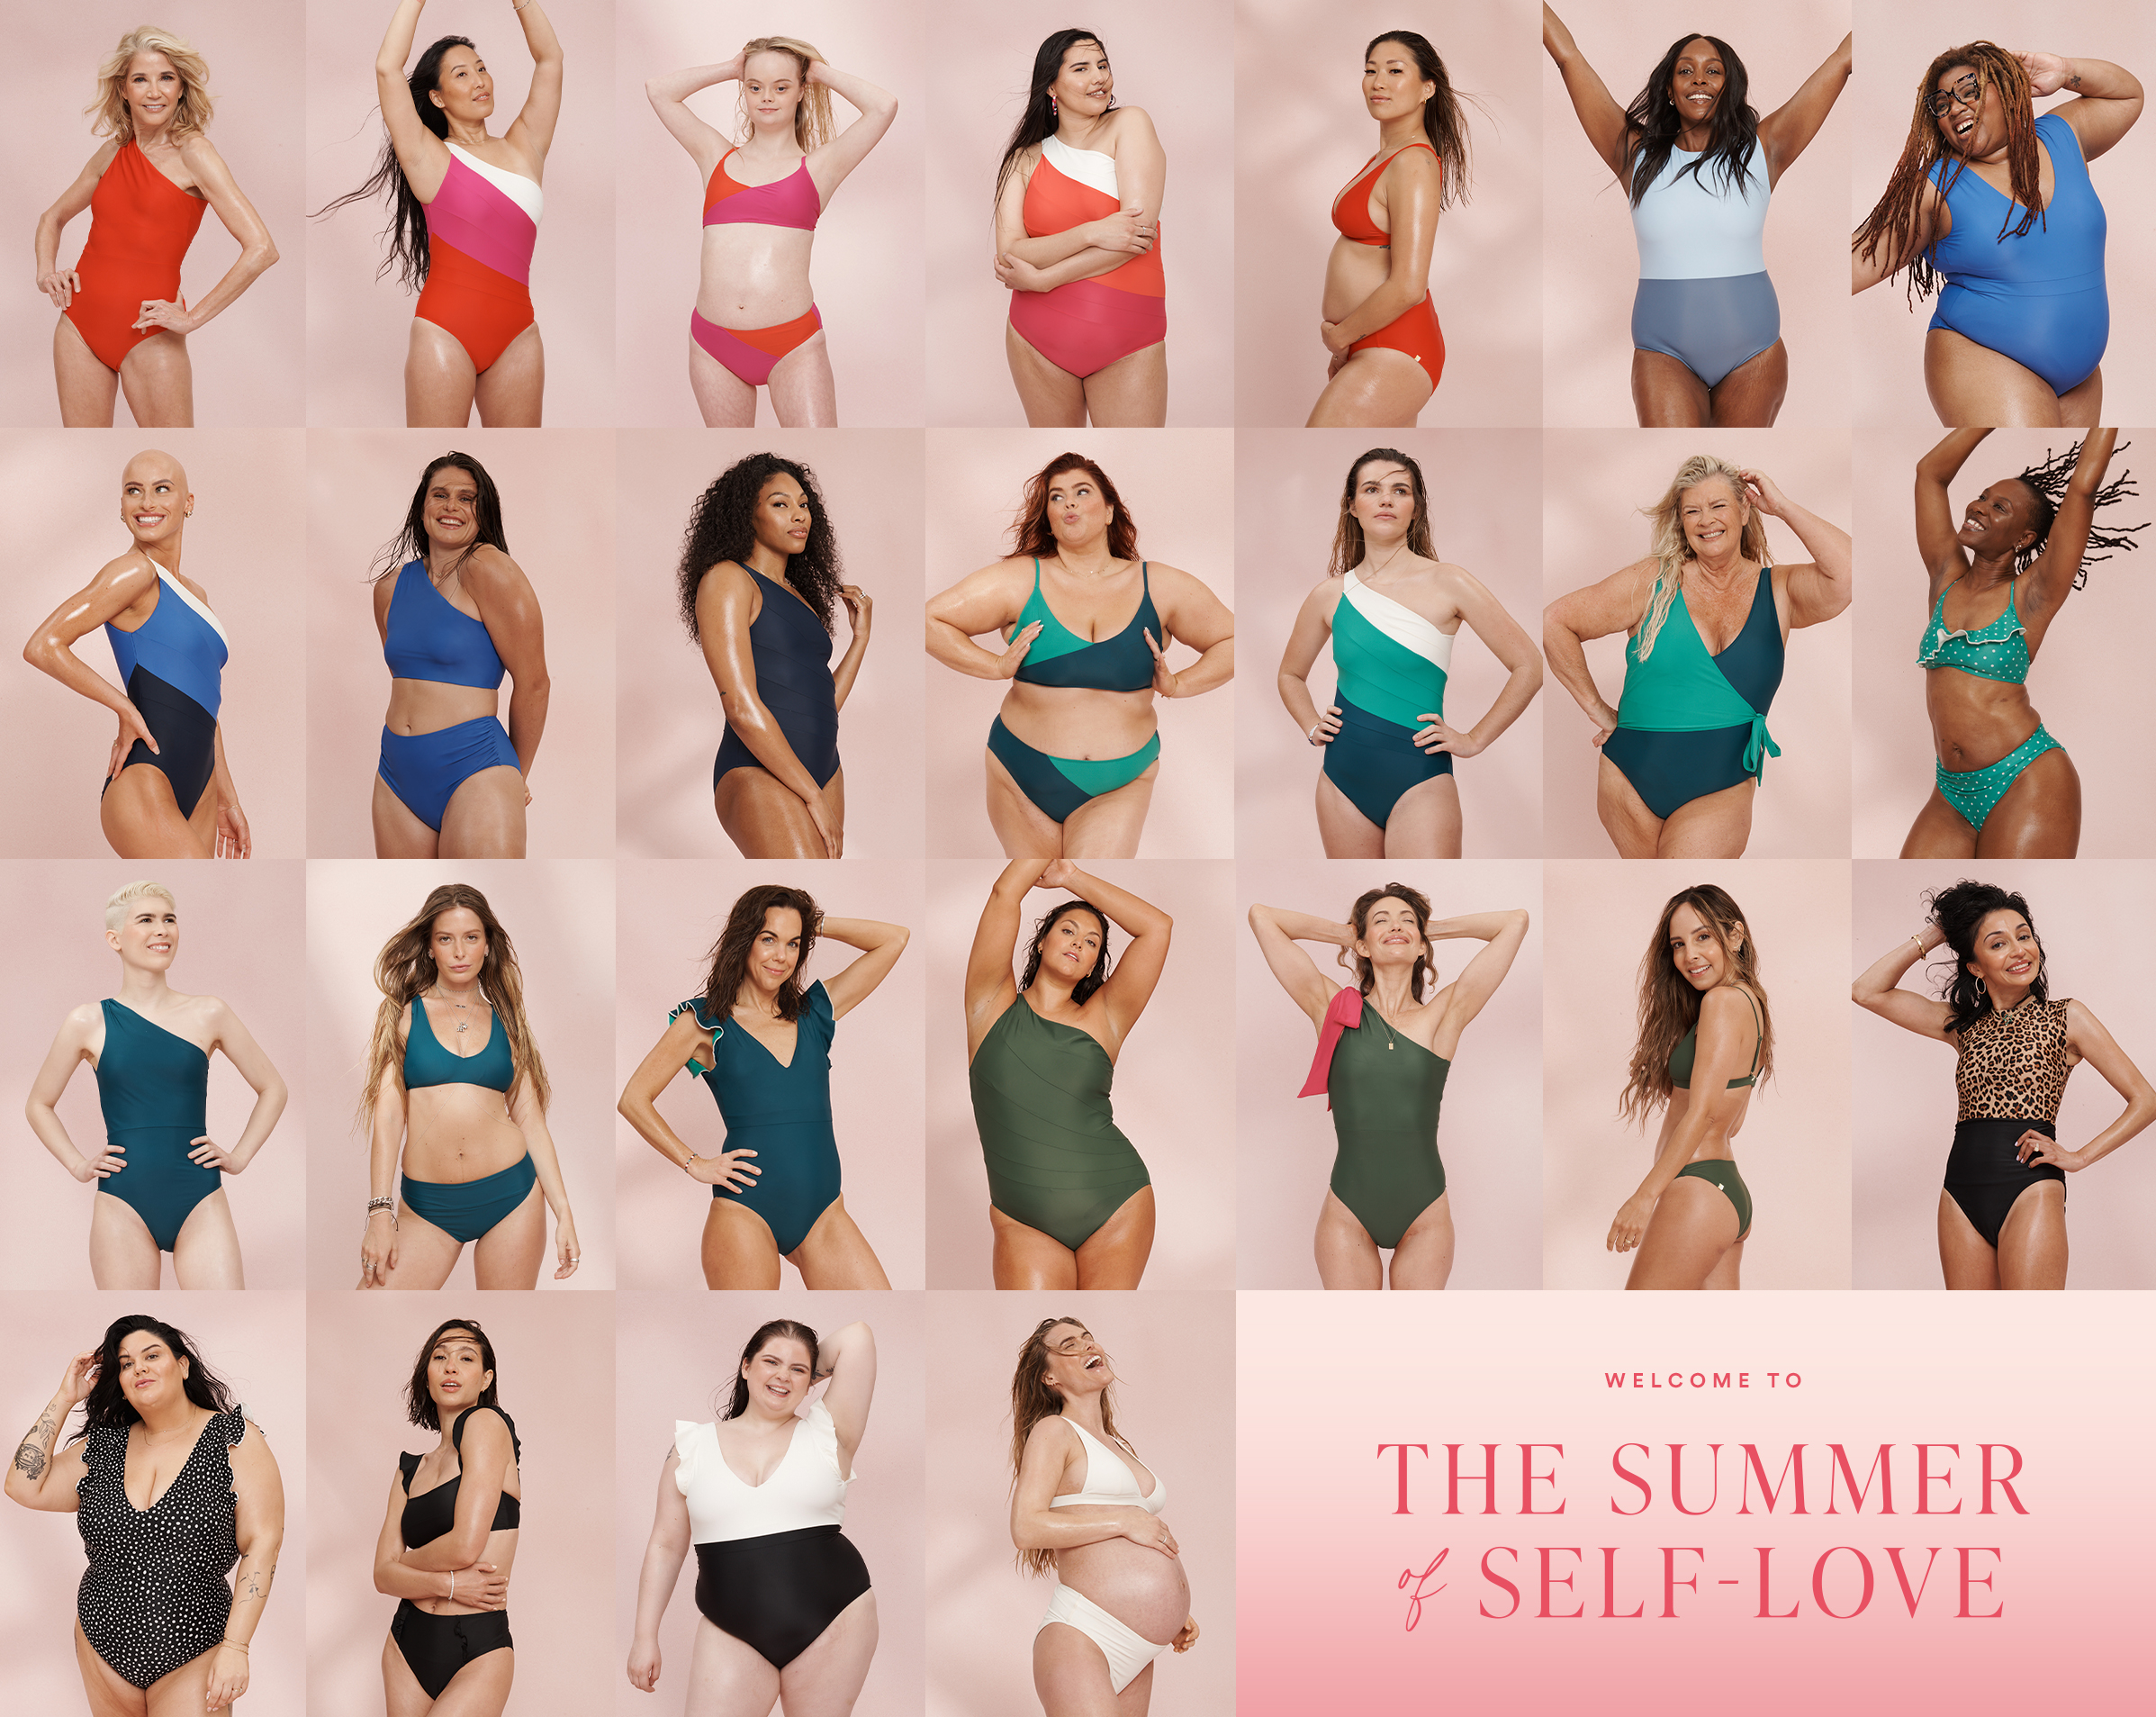  Other Stories is the Latest Brand to Celebrate Real Women's Bodies in  Lingerie Campaign - Fashionista